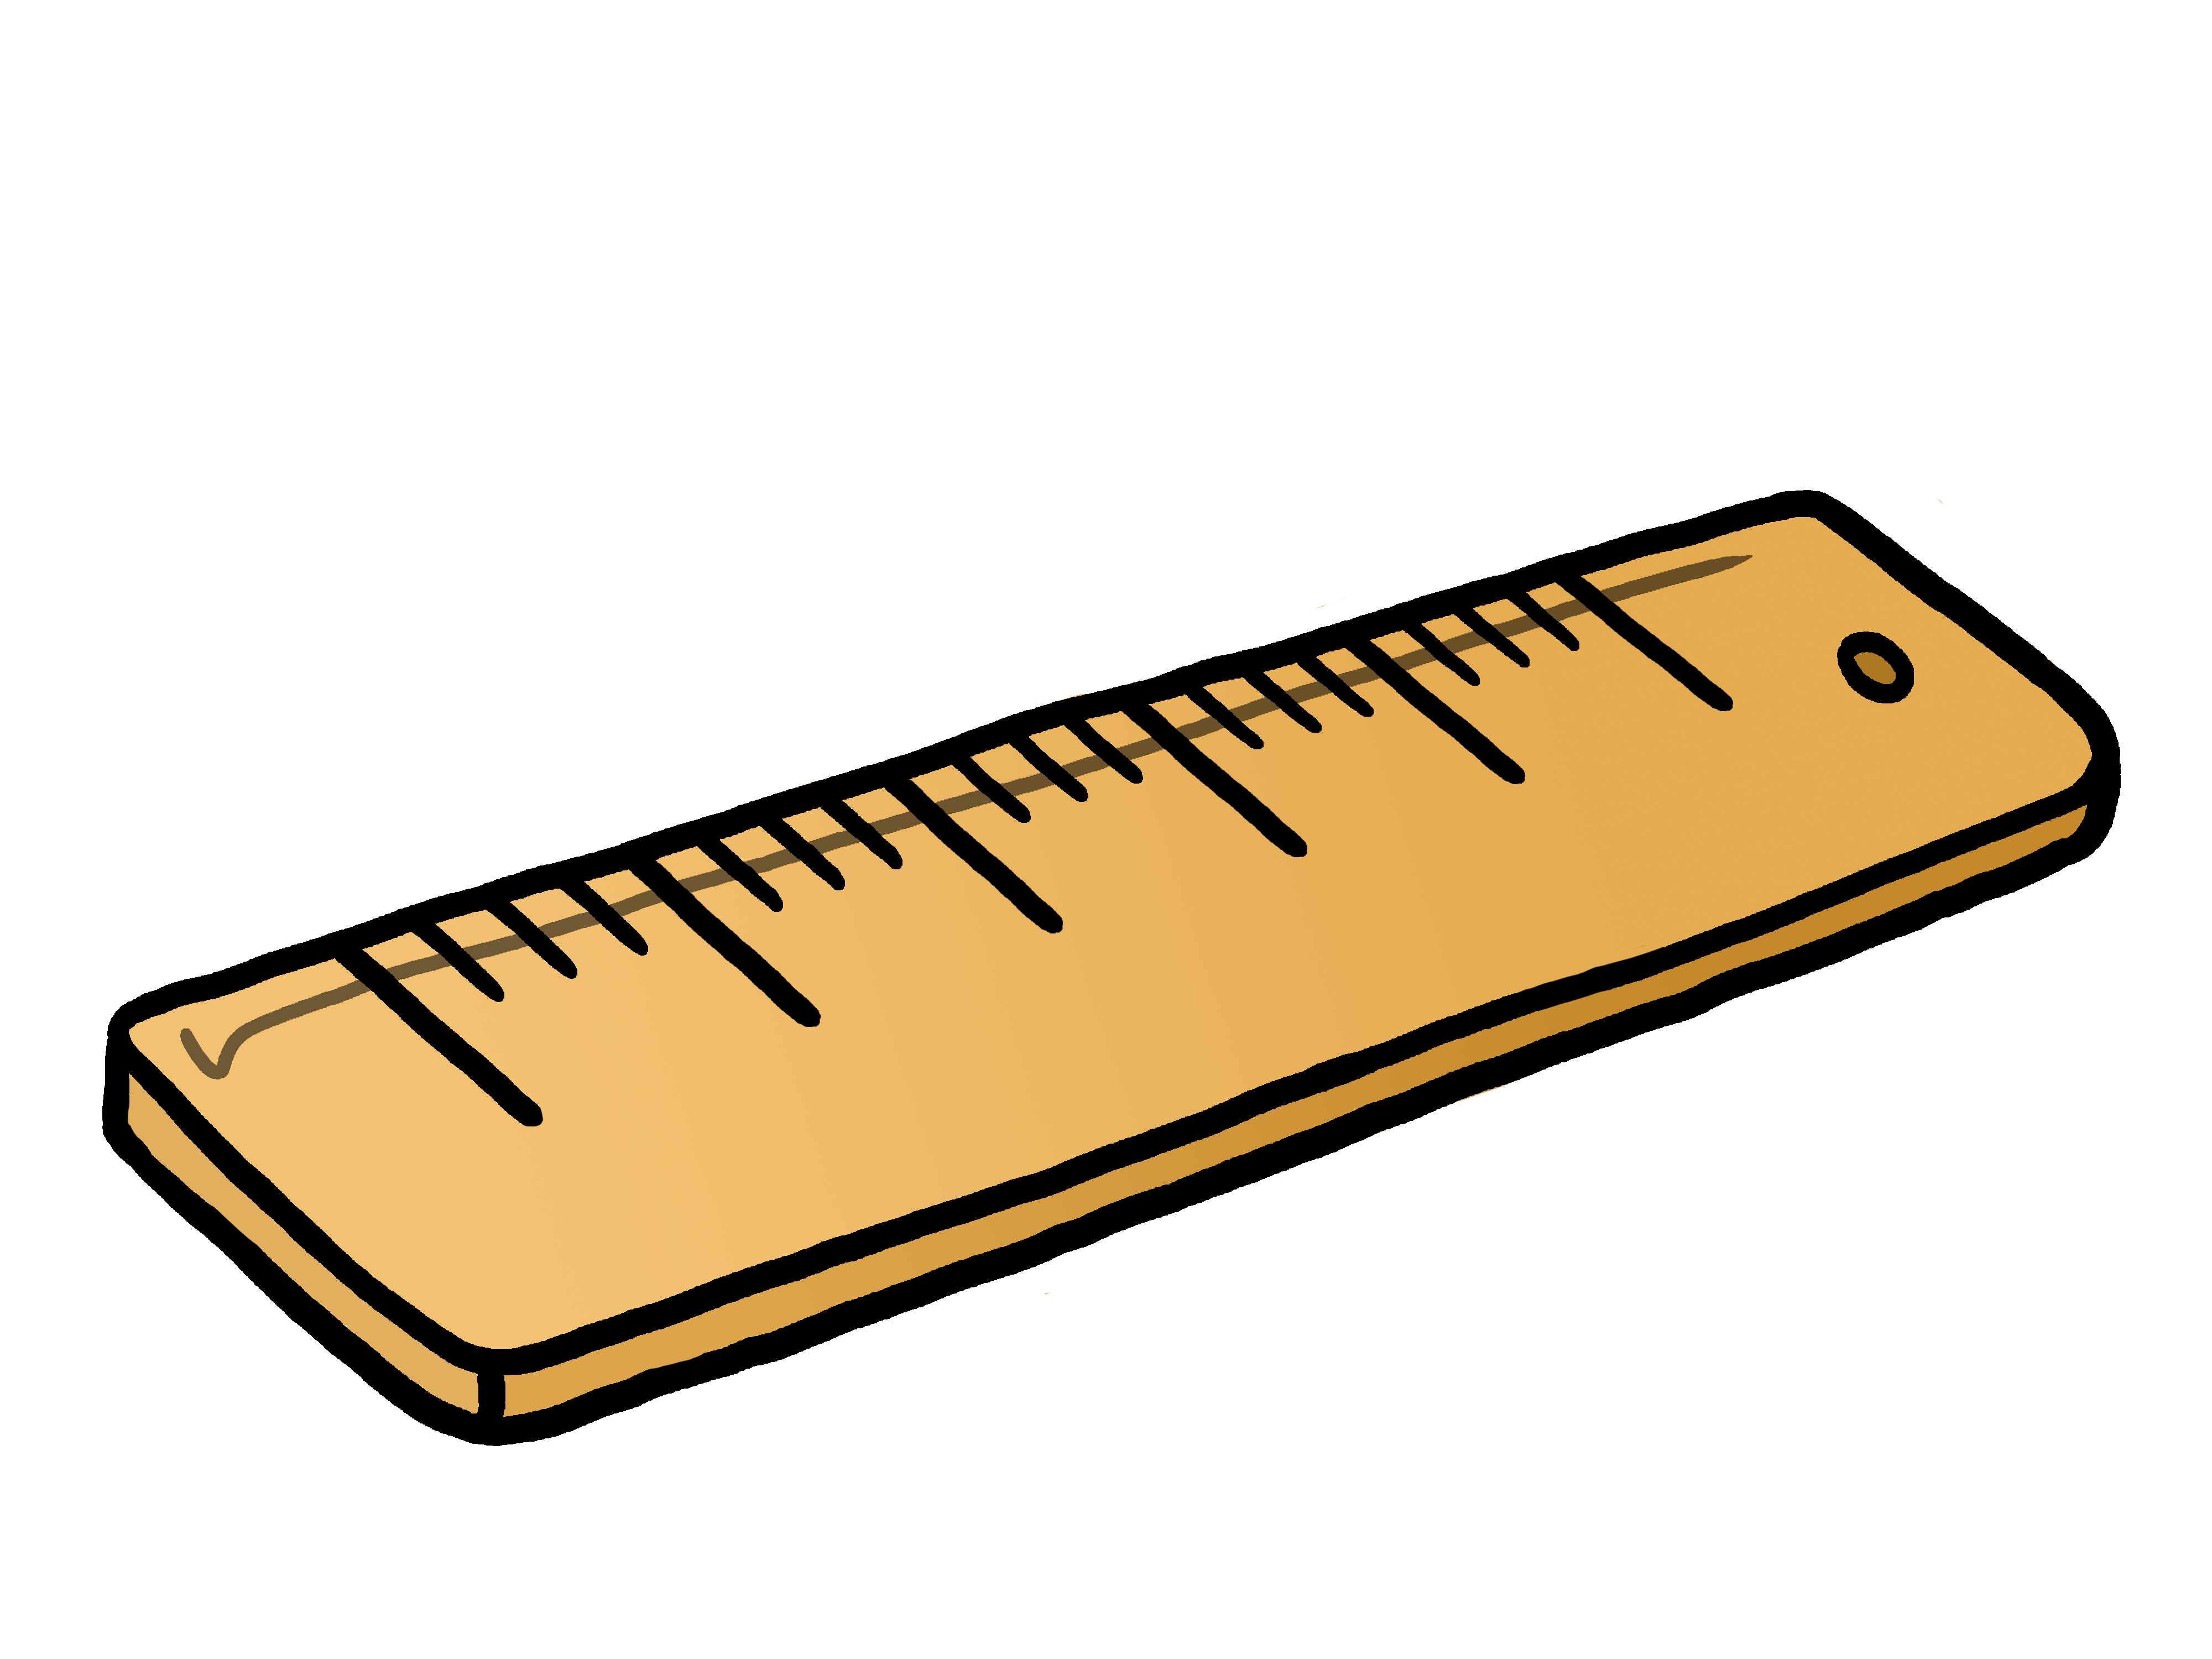 12 Inch Ruler Clipart | Clipart Panda - Free Clipart Images